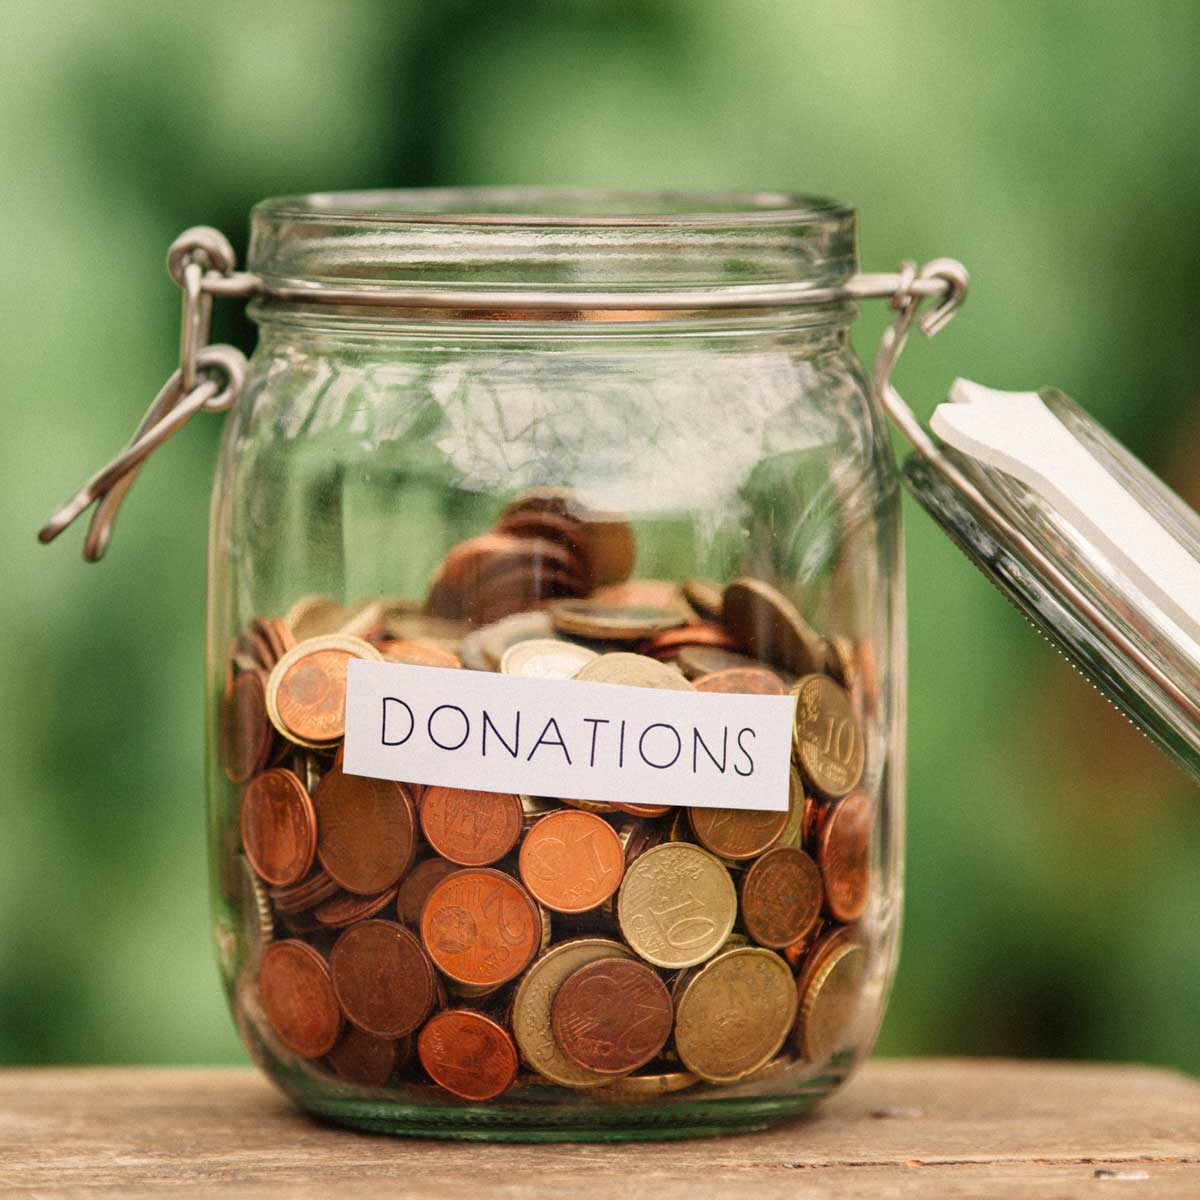 Glass jar with coins and change piled up. label of donations across front of jar